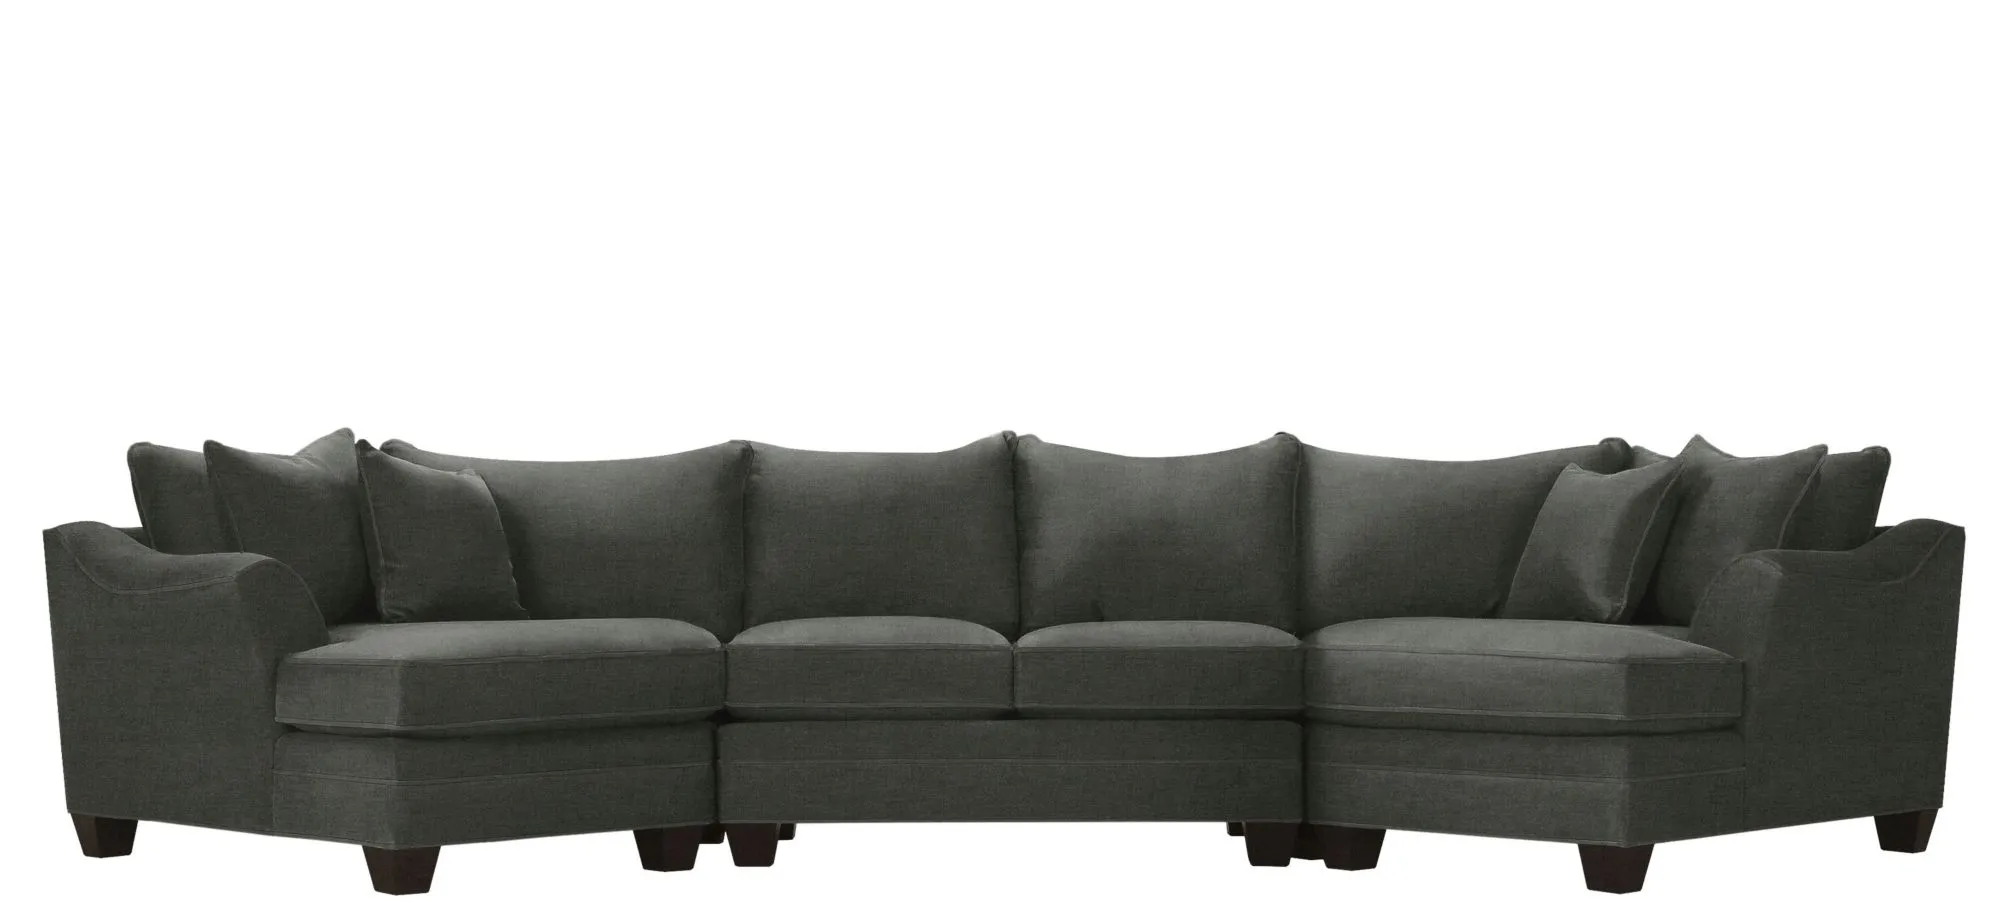 Foresthill 3-pc. Symmetrical Cuddler Sectional Sofa in Santa Rosa Slate by H.M. Richards